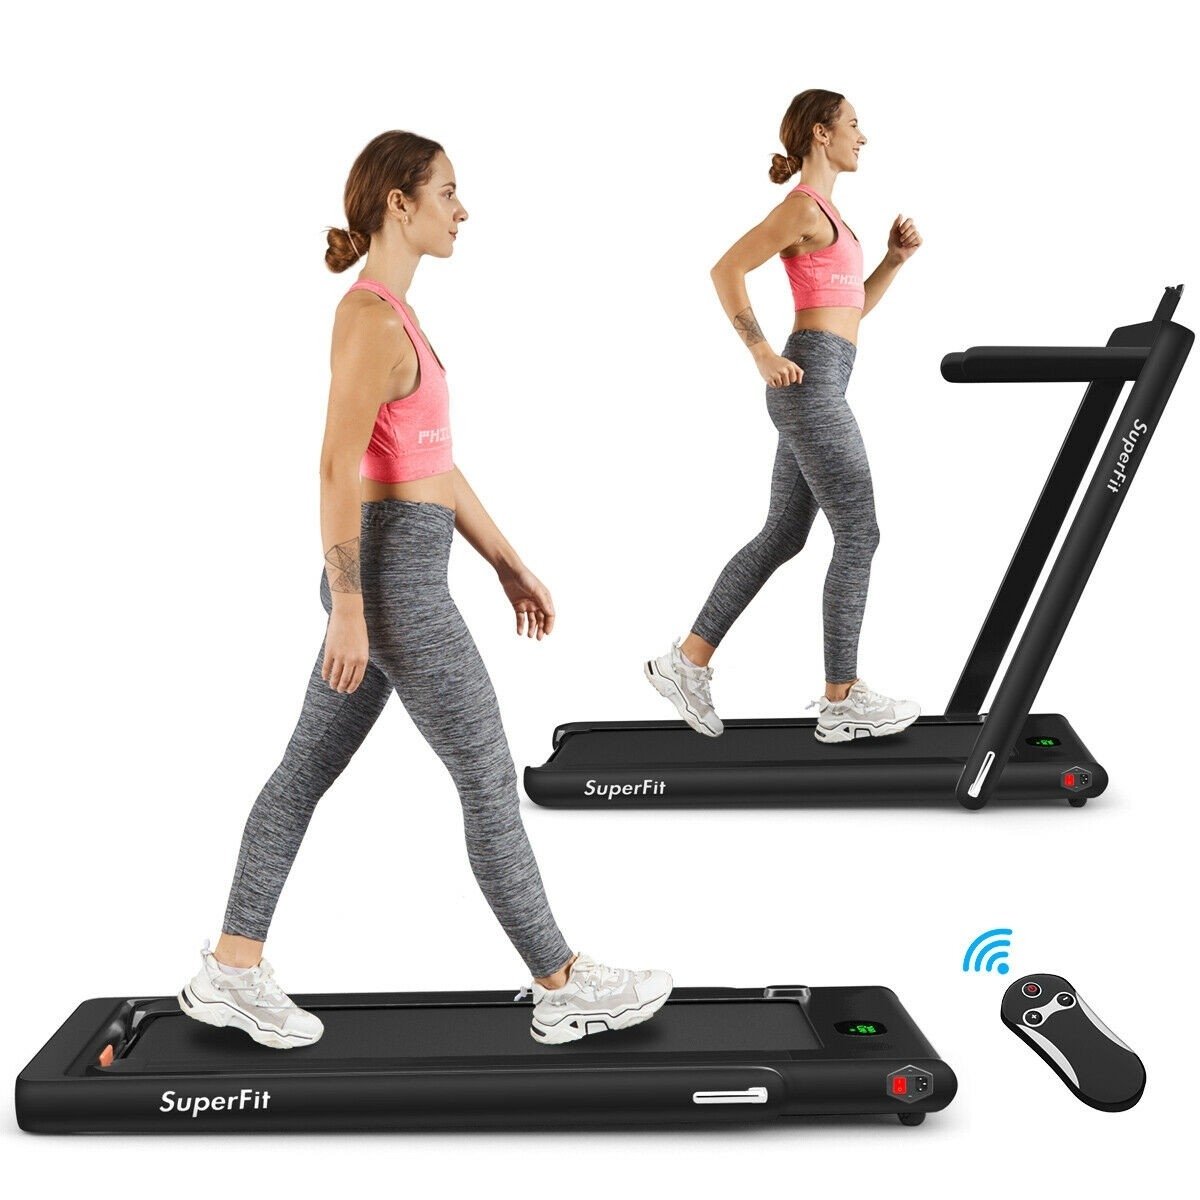 GYMAX 2 in 1 Under Desk Treadmill 2.25HP Folding Walking Jogging Machine with Dual Display Electric Motorized Treadmill for Home/Gym Bluetooth Speaker & Remote Controller 